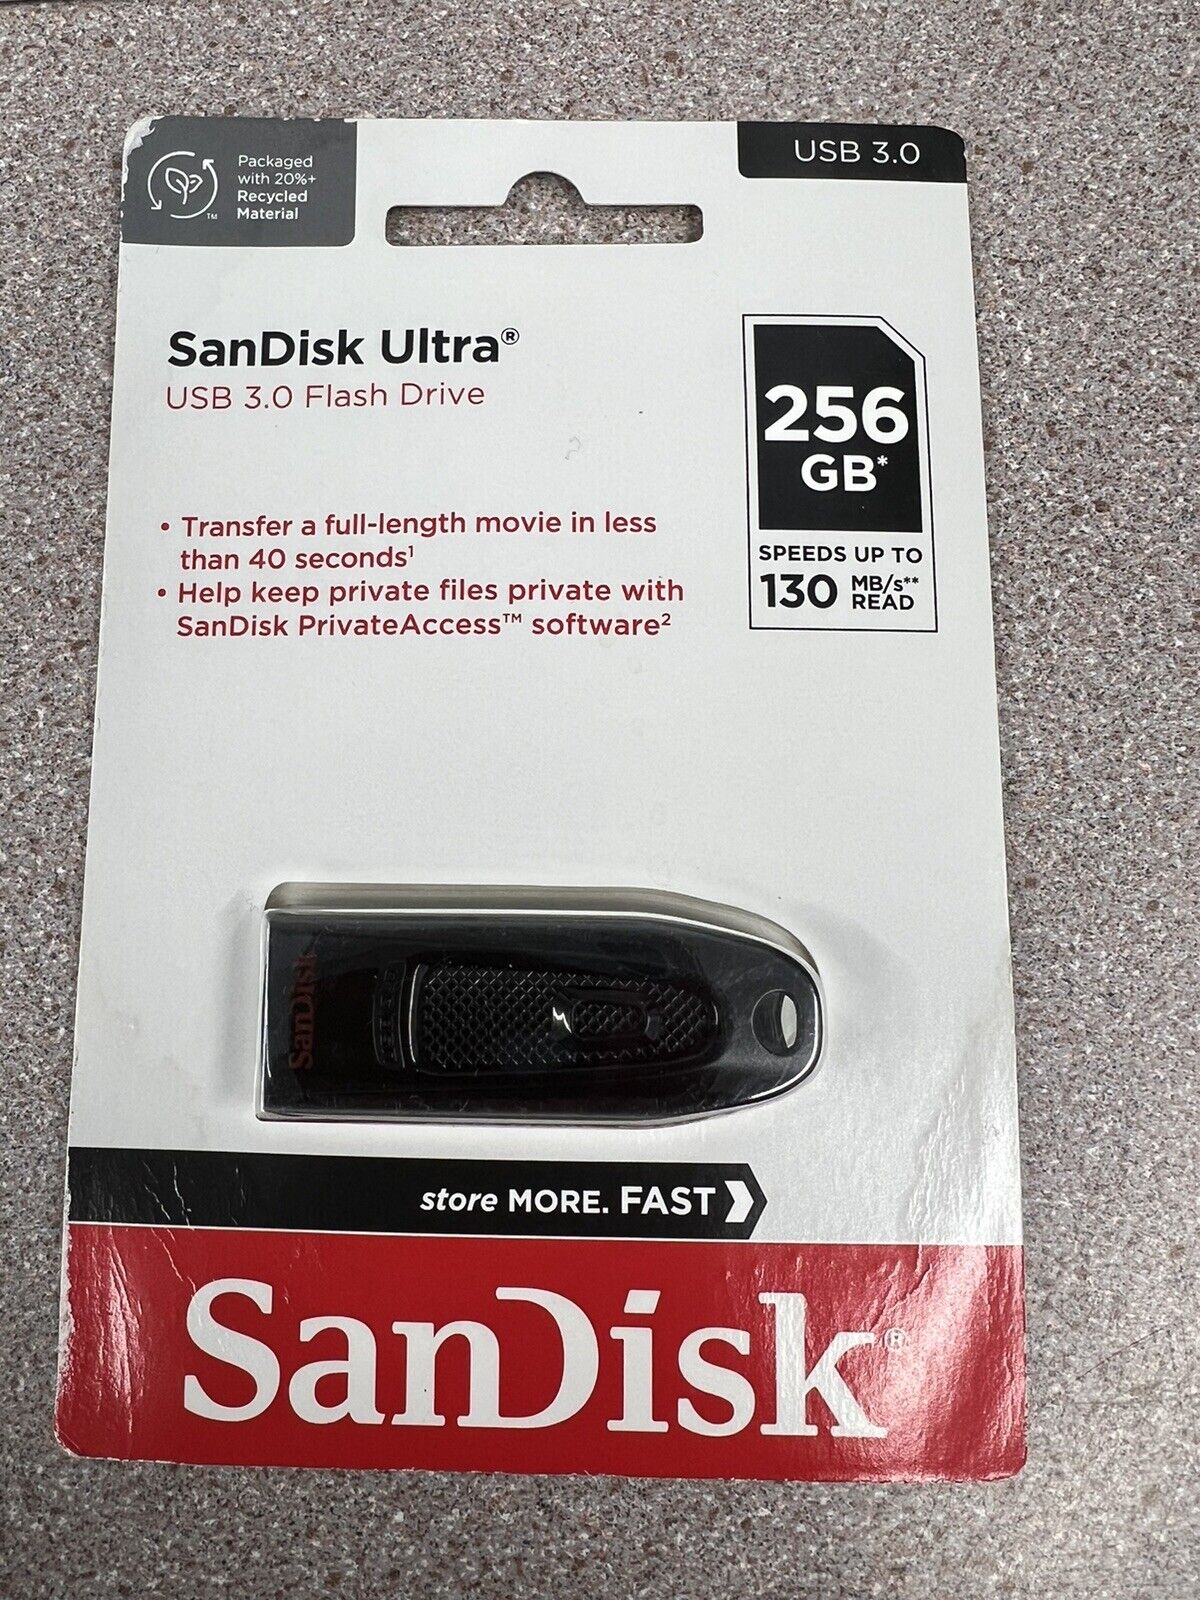 SanDisk SDCZ48-256G-AW46 256GB 130MB/s Ultra USB 3.0 Flash Drive New Sealed